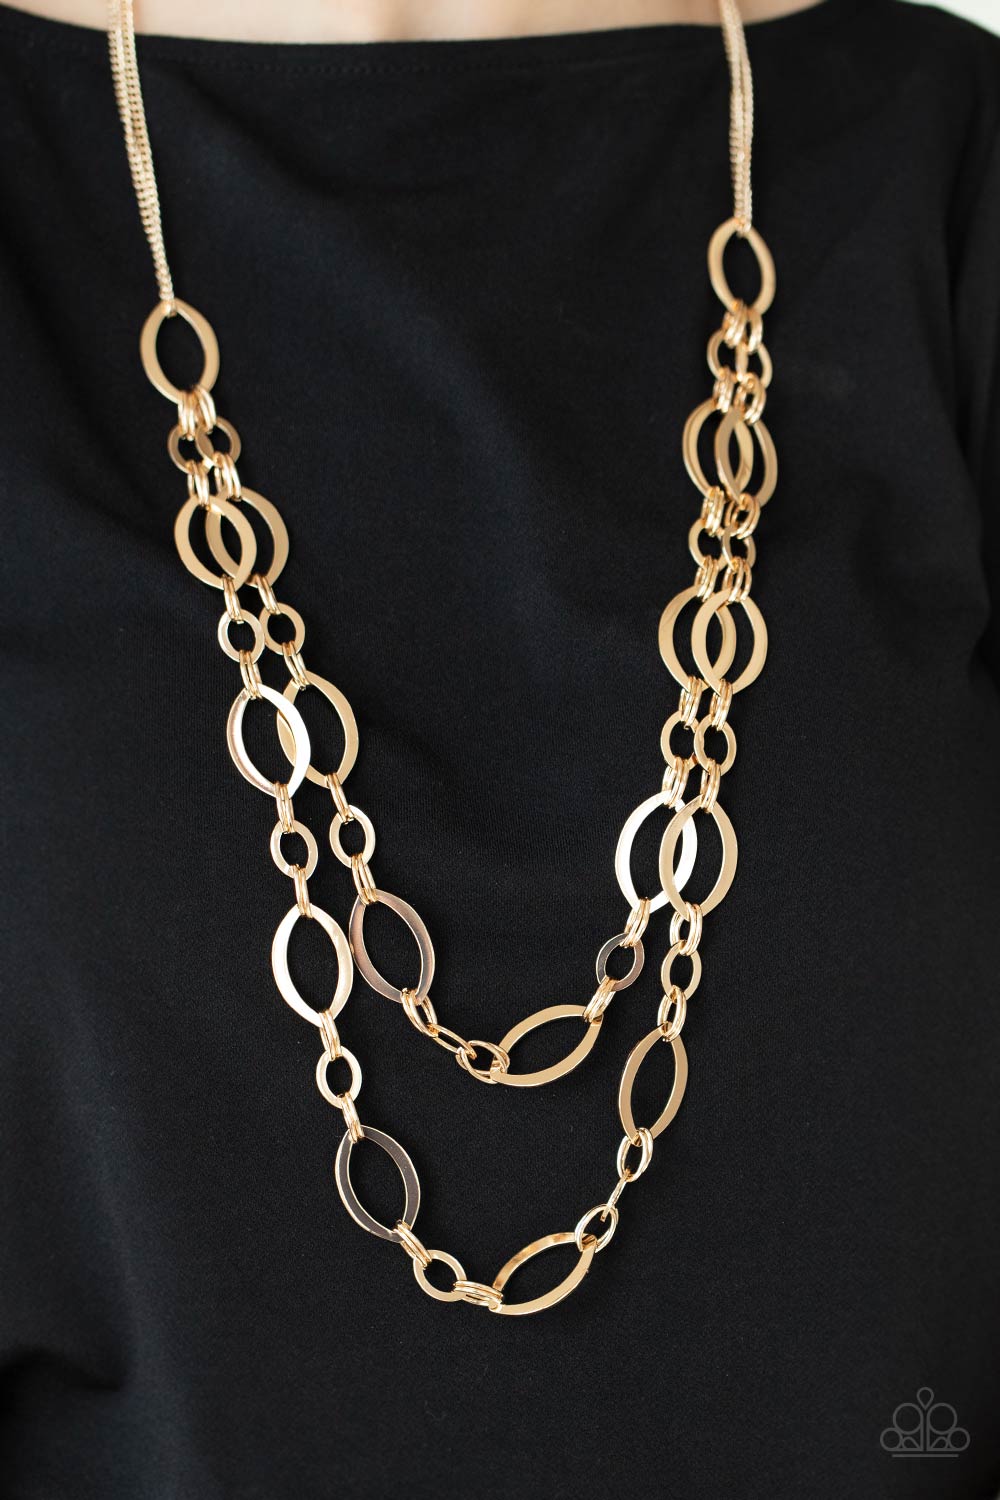 PRE-ORDER - Paparazzi The OVAL-achiever - Gold - Necklace & Earrings - $5 Jewelry with Ashley Swint